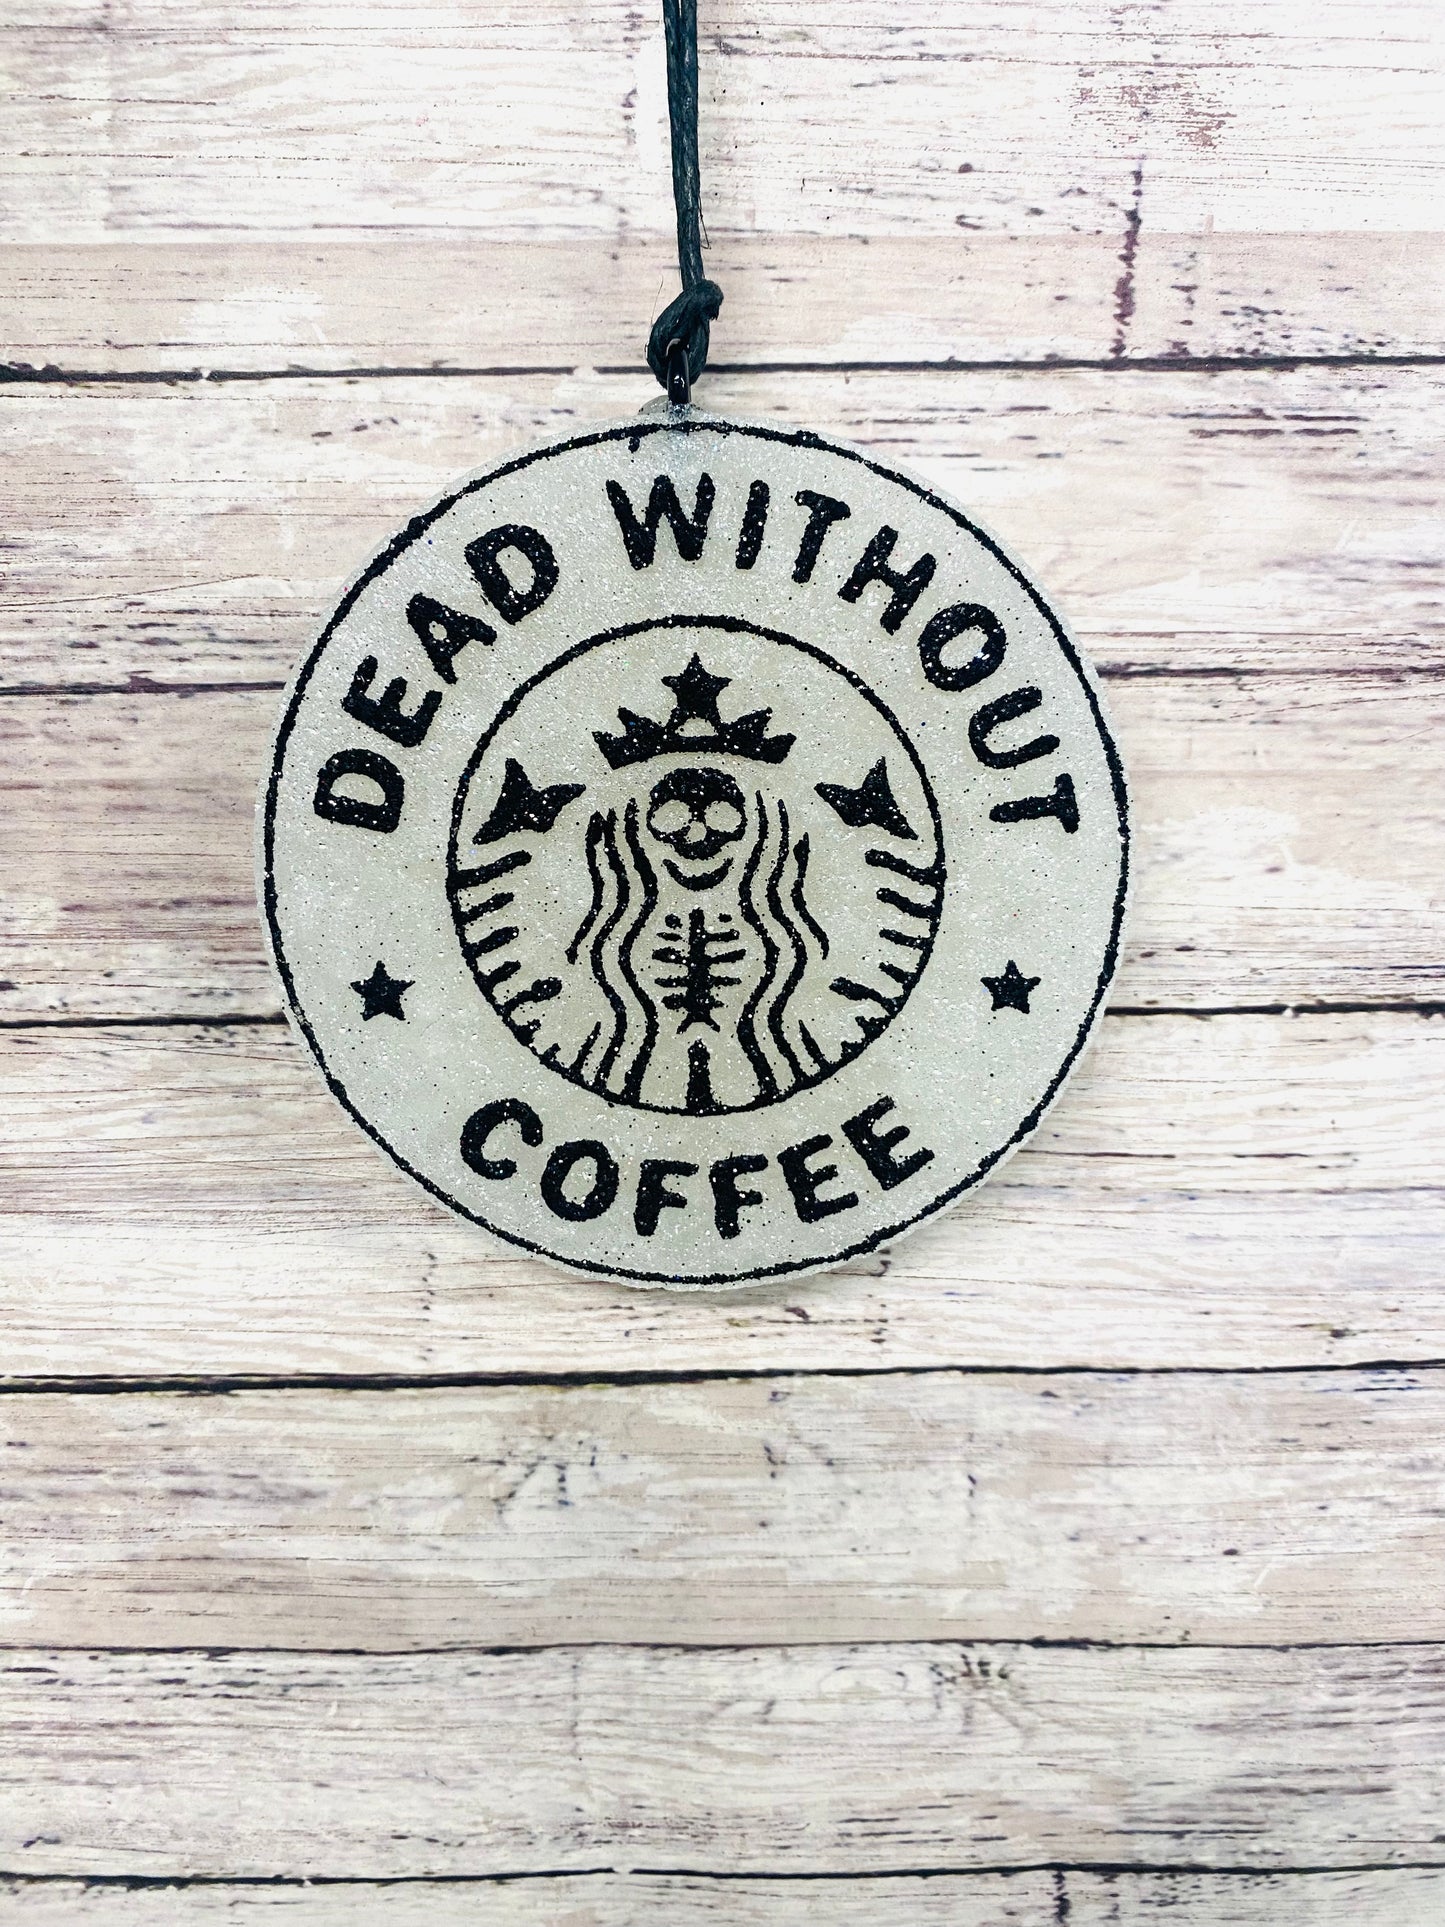 Dead without Coffee